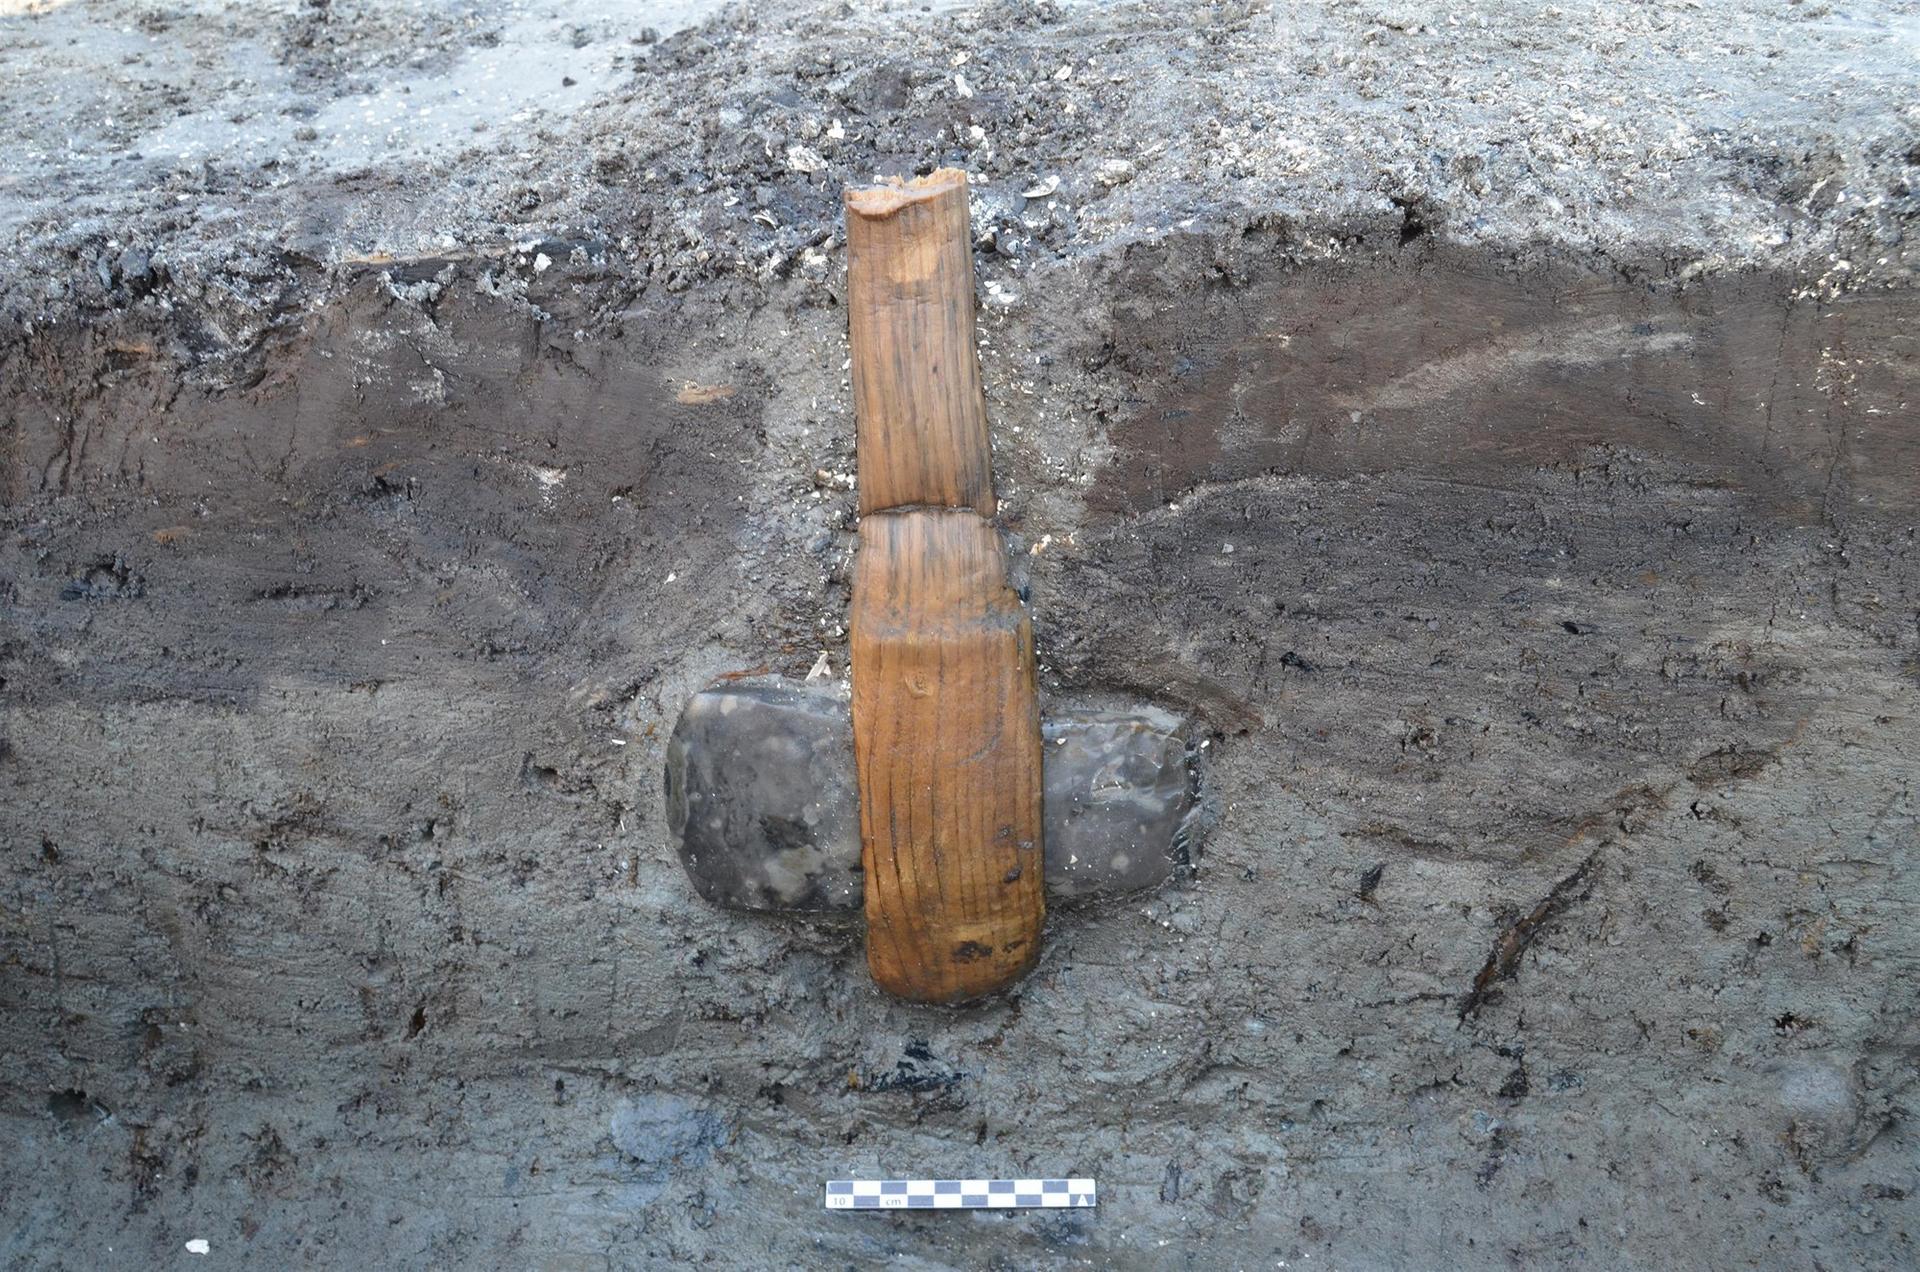 Stone Axes were a vital innovation to the development of agriculture and settlement building. This Axe was preserved in clay, making it extremely intact.